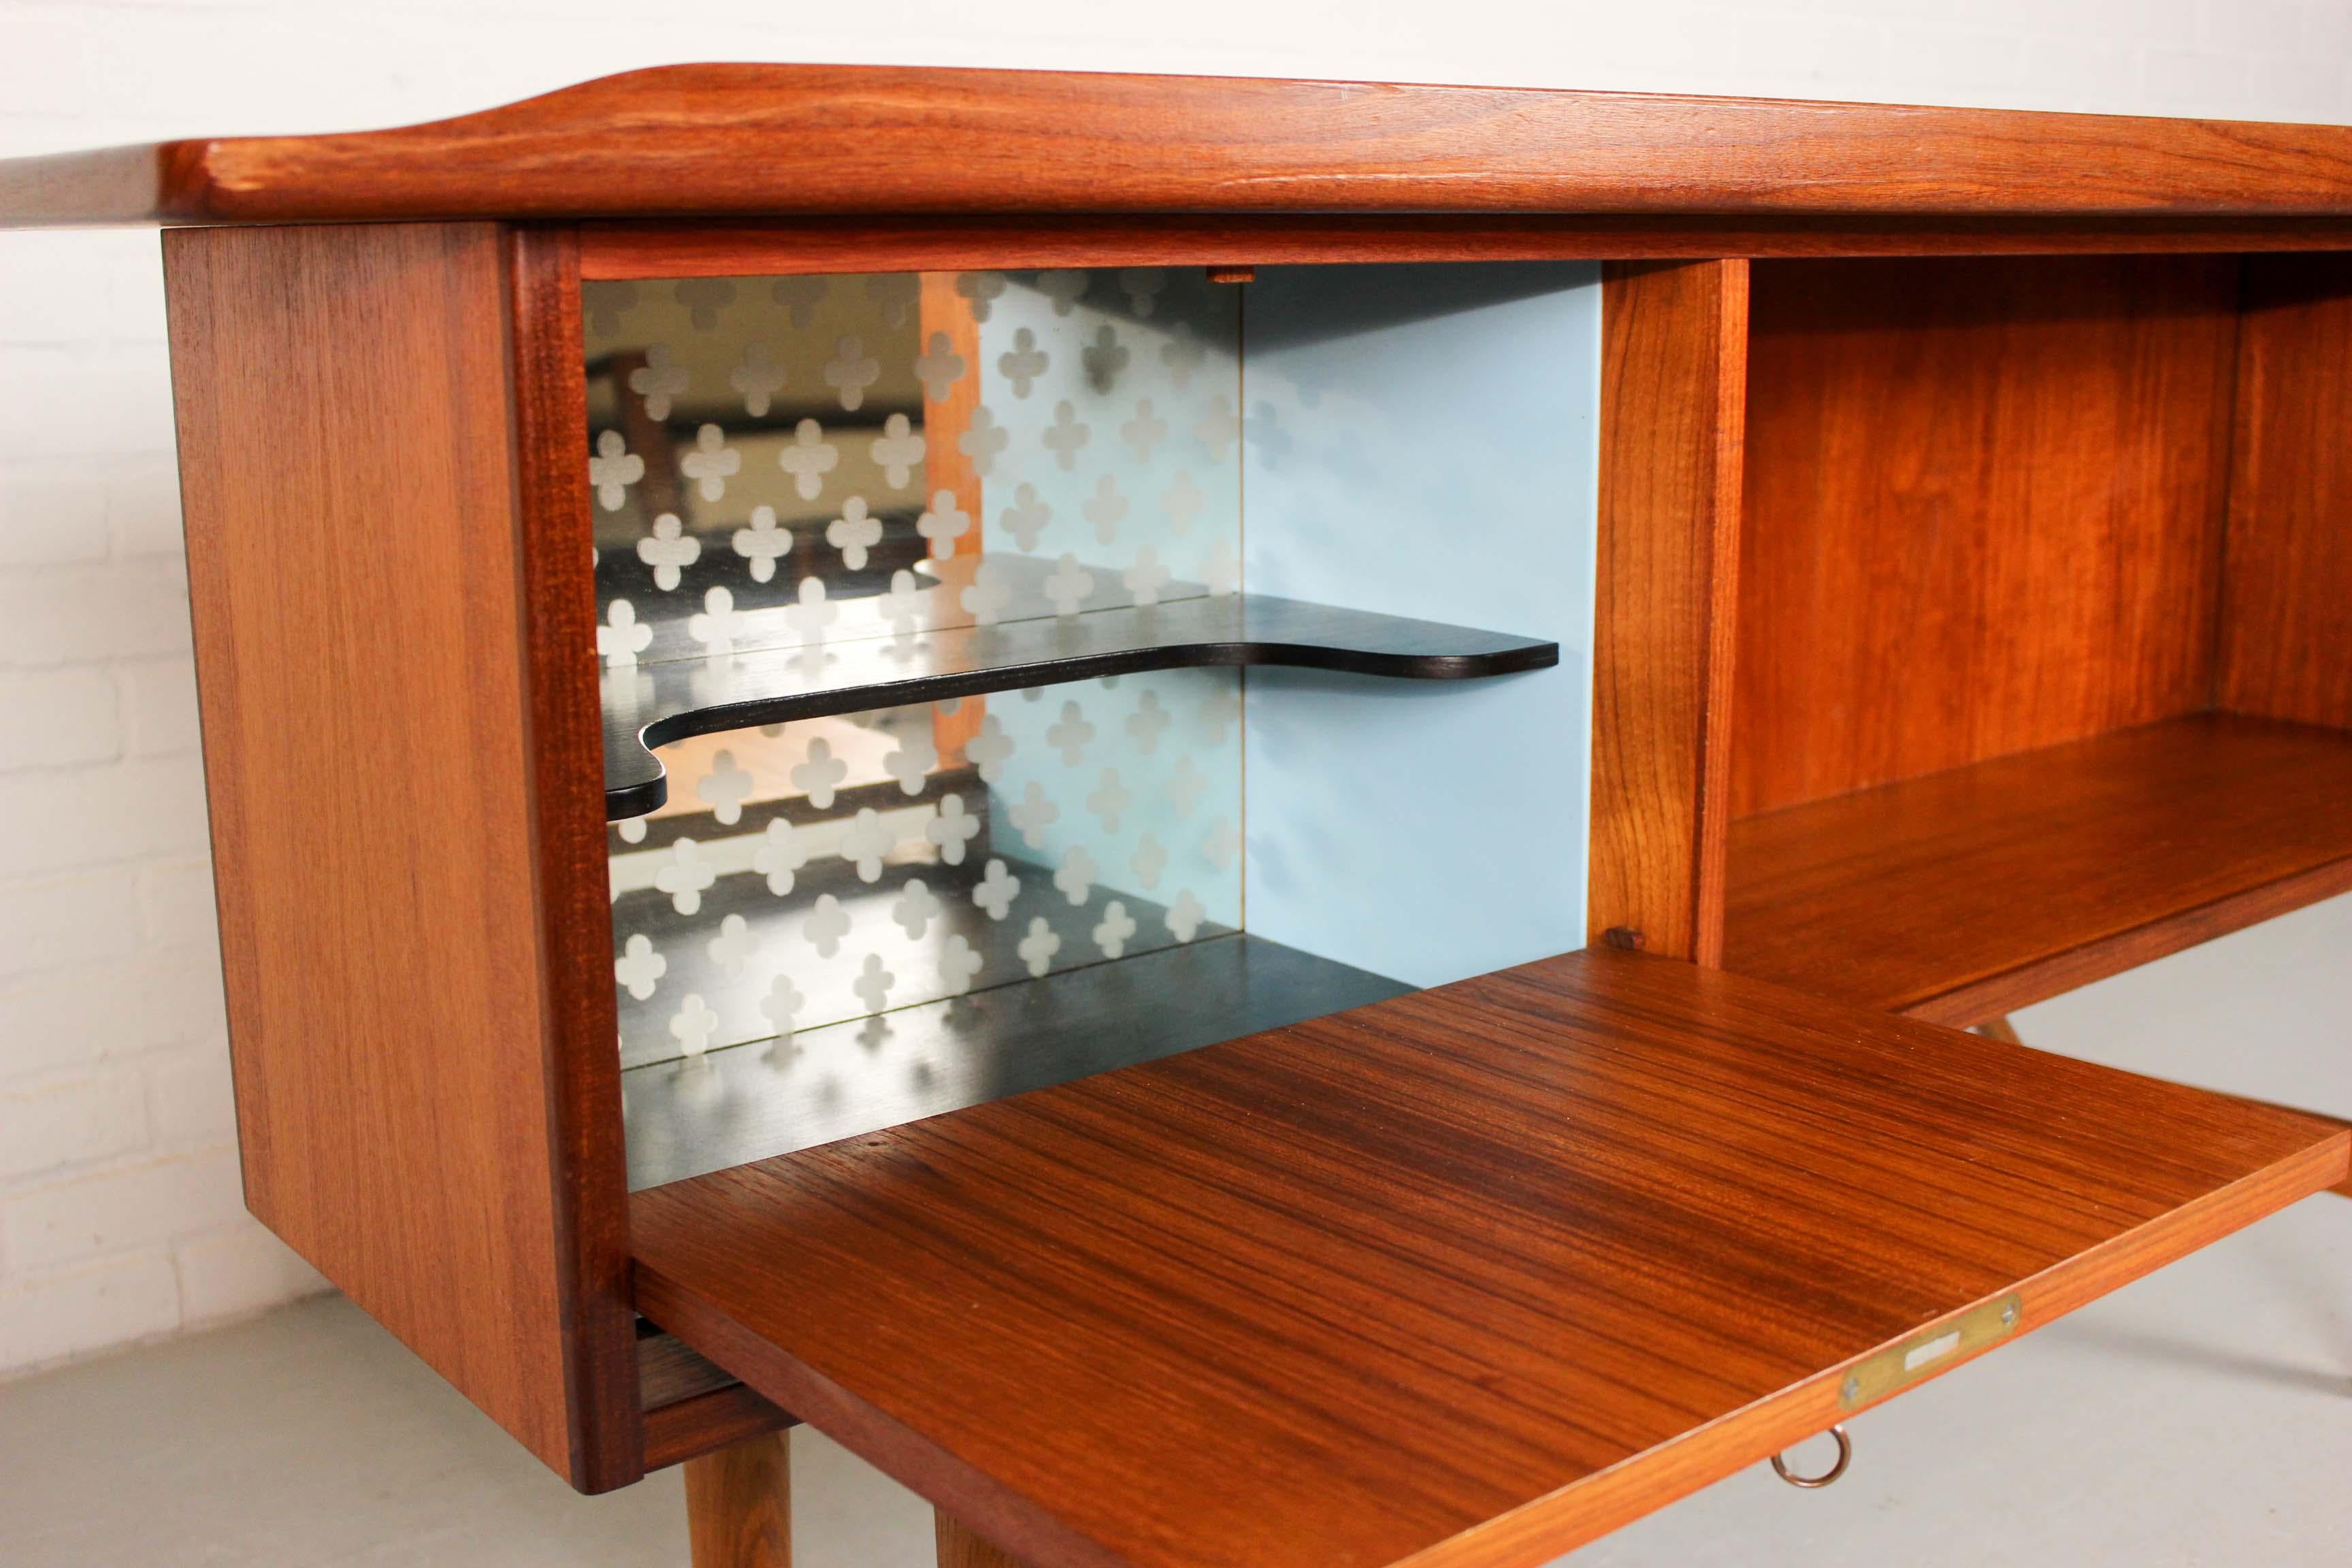 The desk is veneered in teak wood with solid teak legs and details. The frame has some brass parts. With beautiful drinks cabinet in light blue and bookshelve on backside. 
 